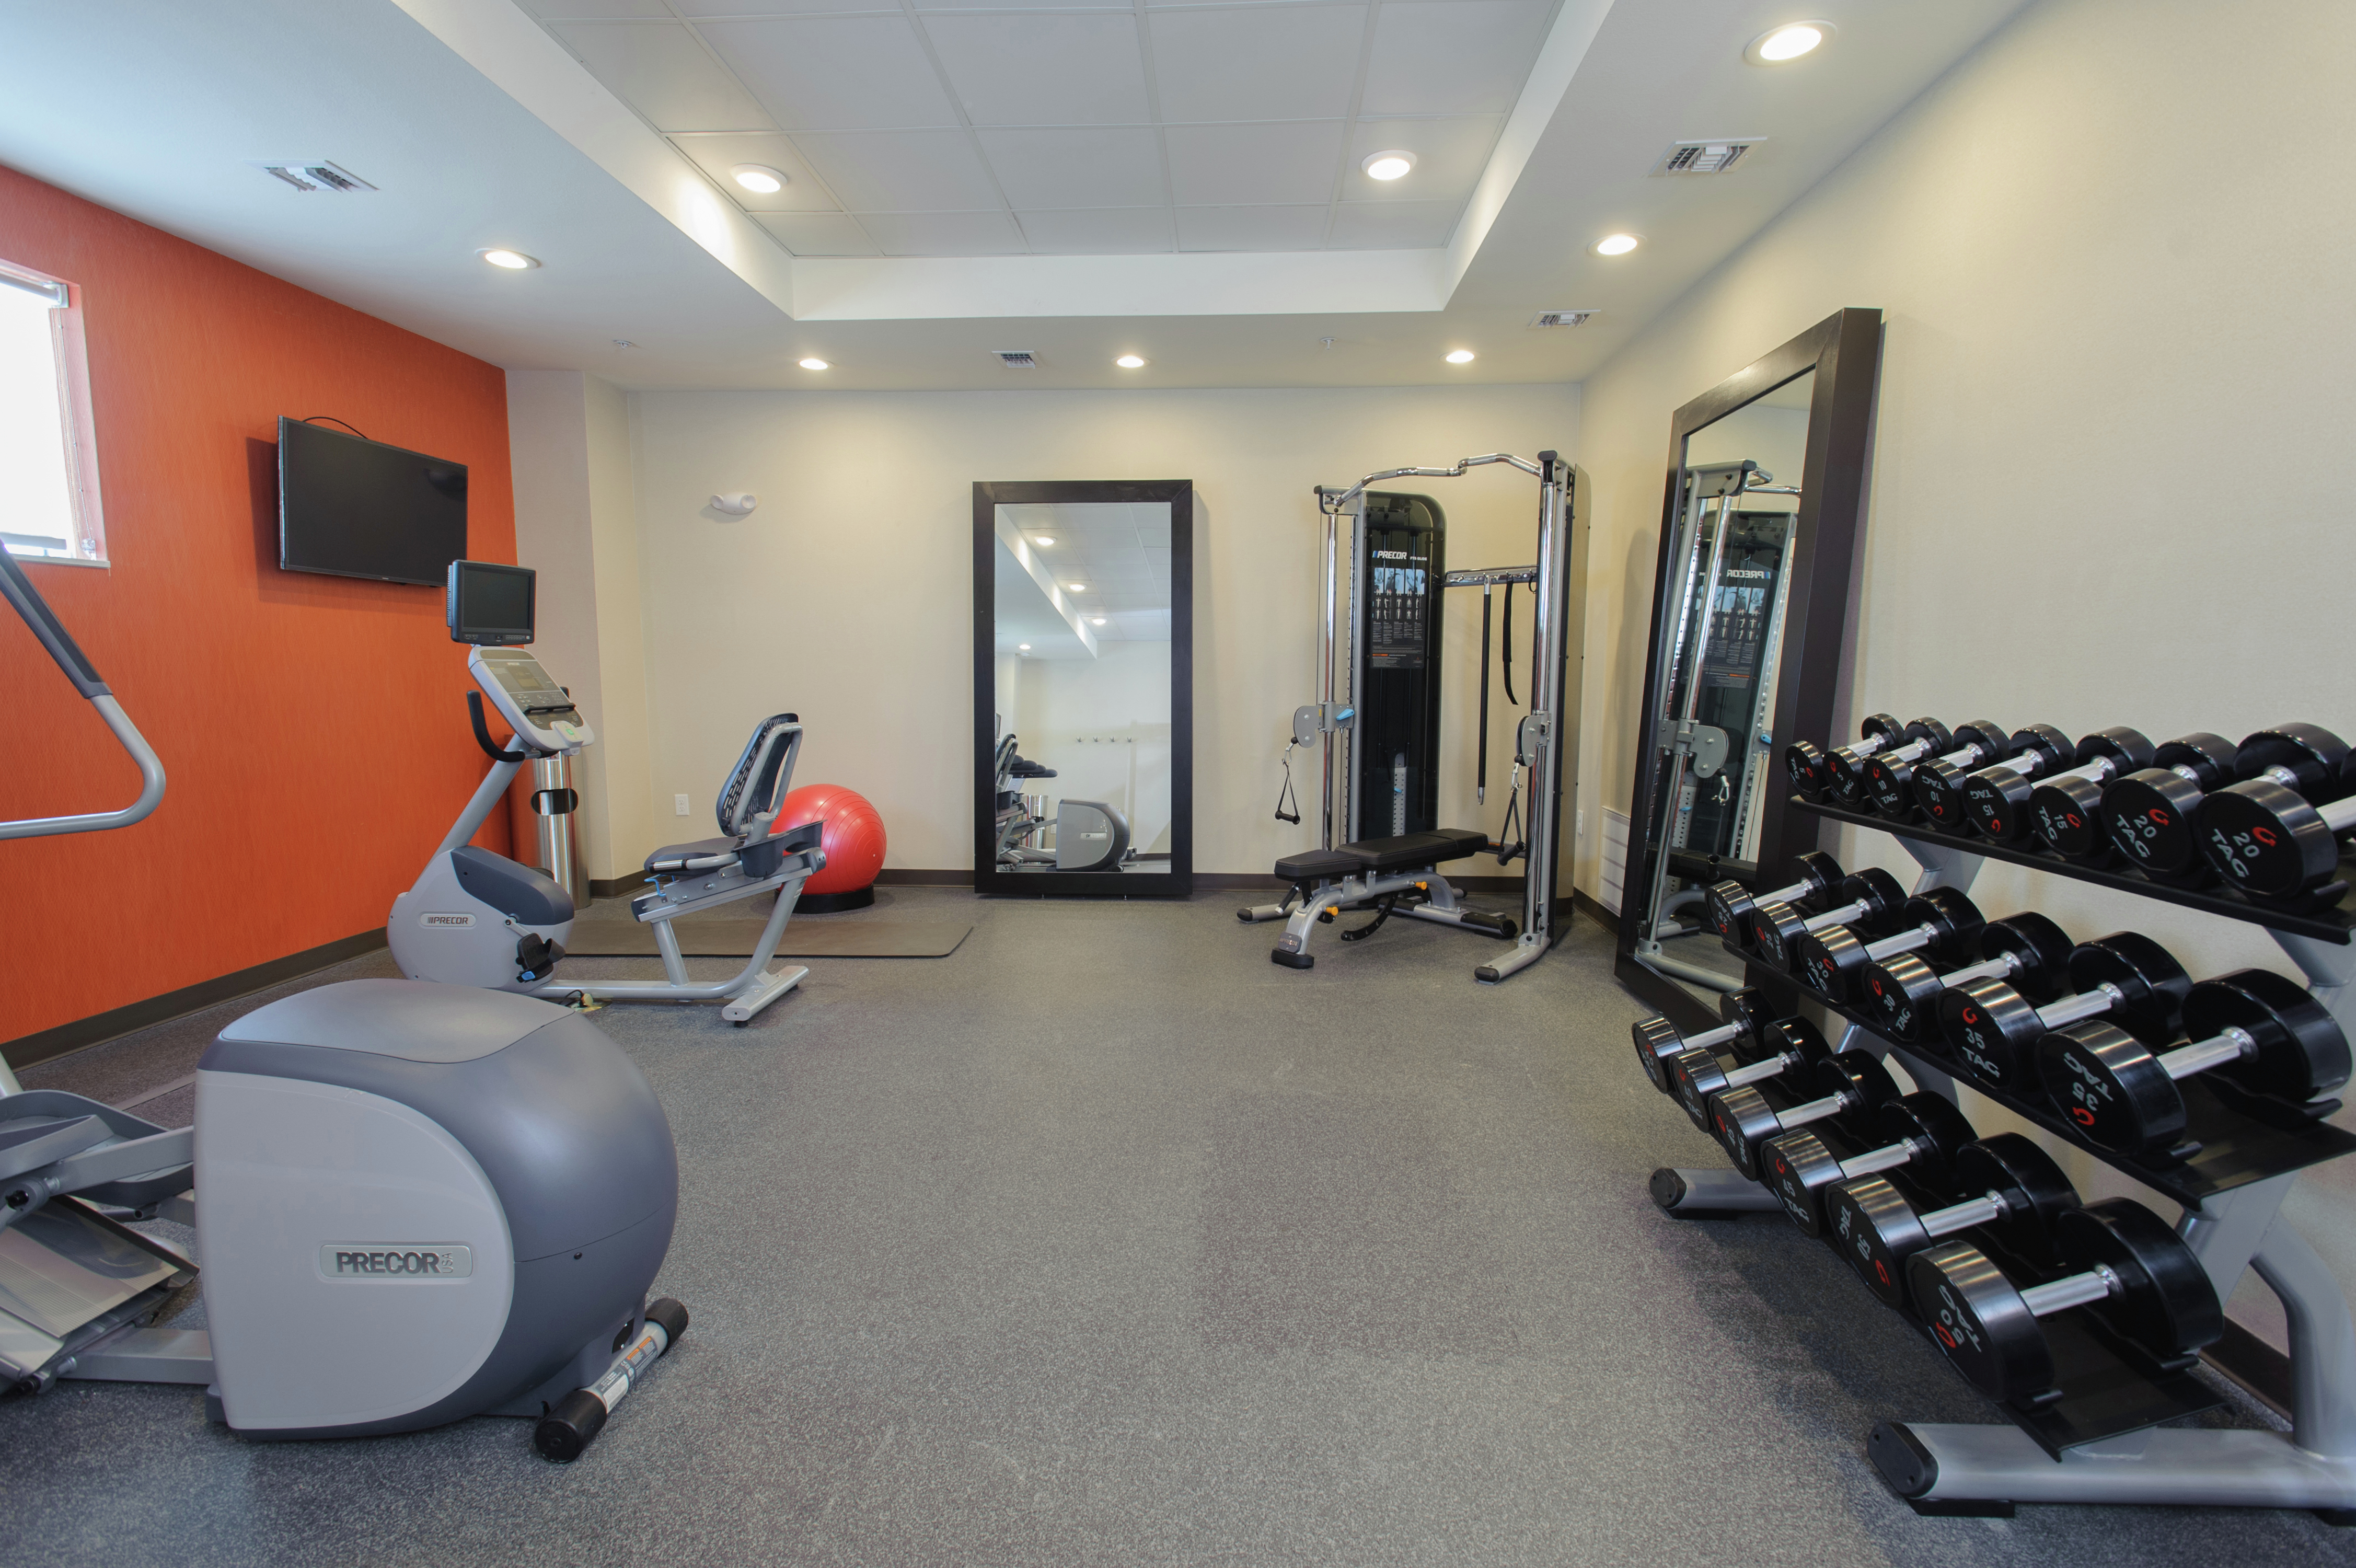 Fitness center with free weights and cardio machines.